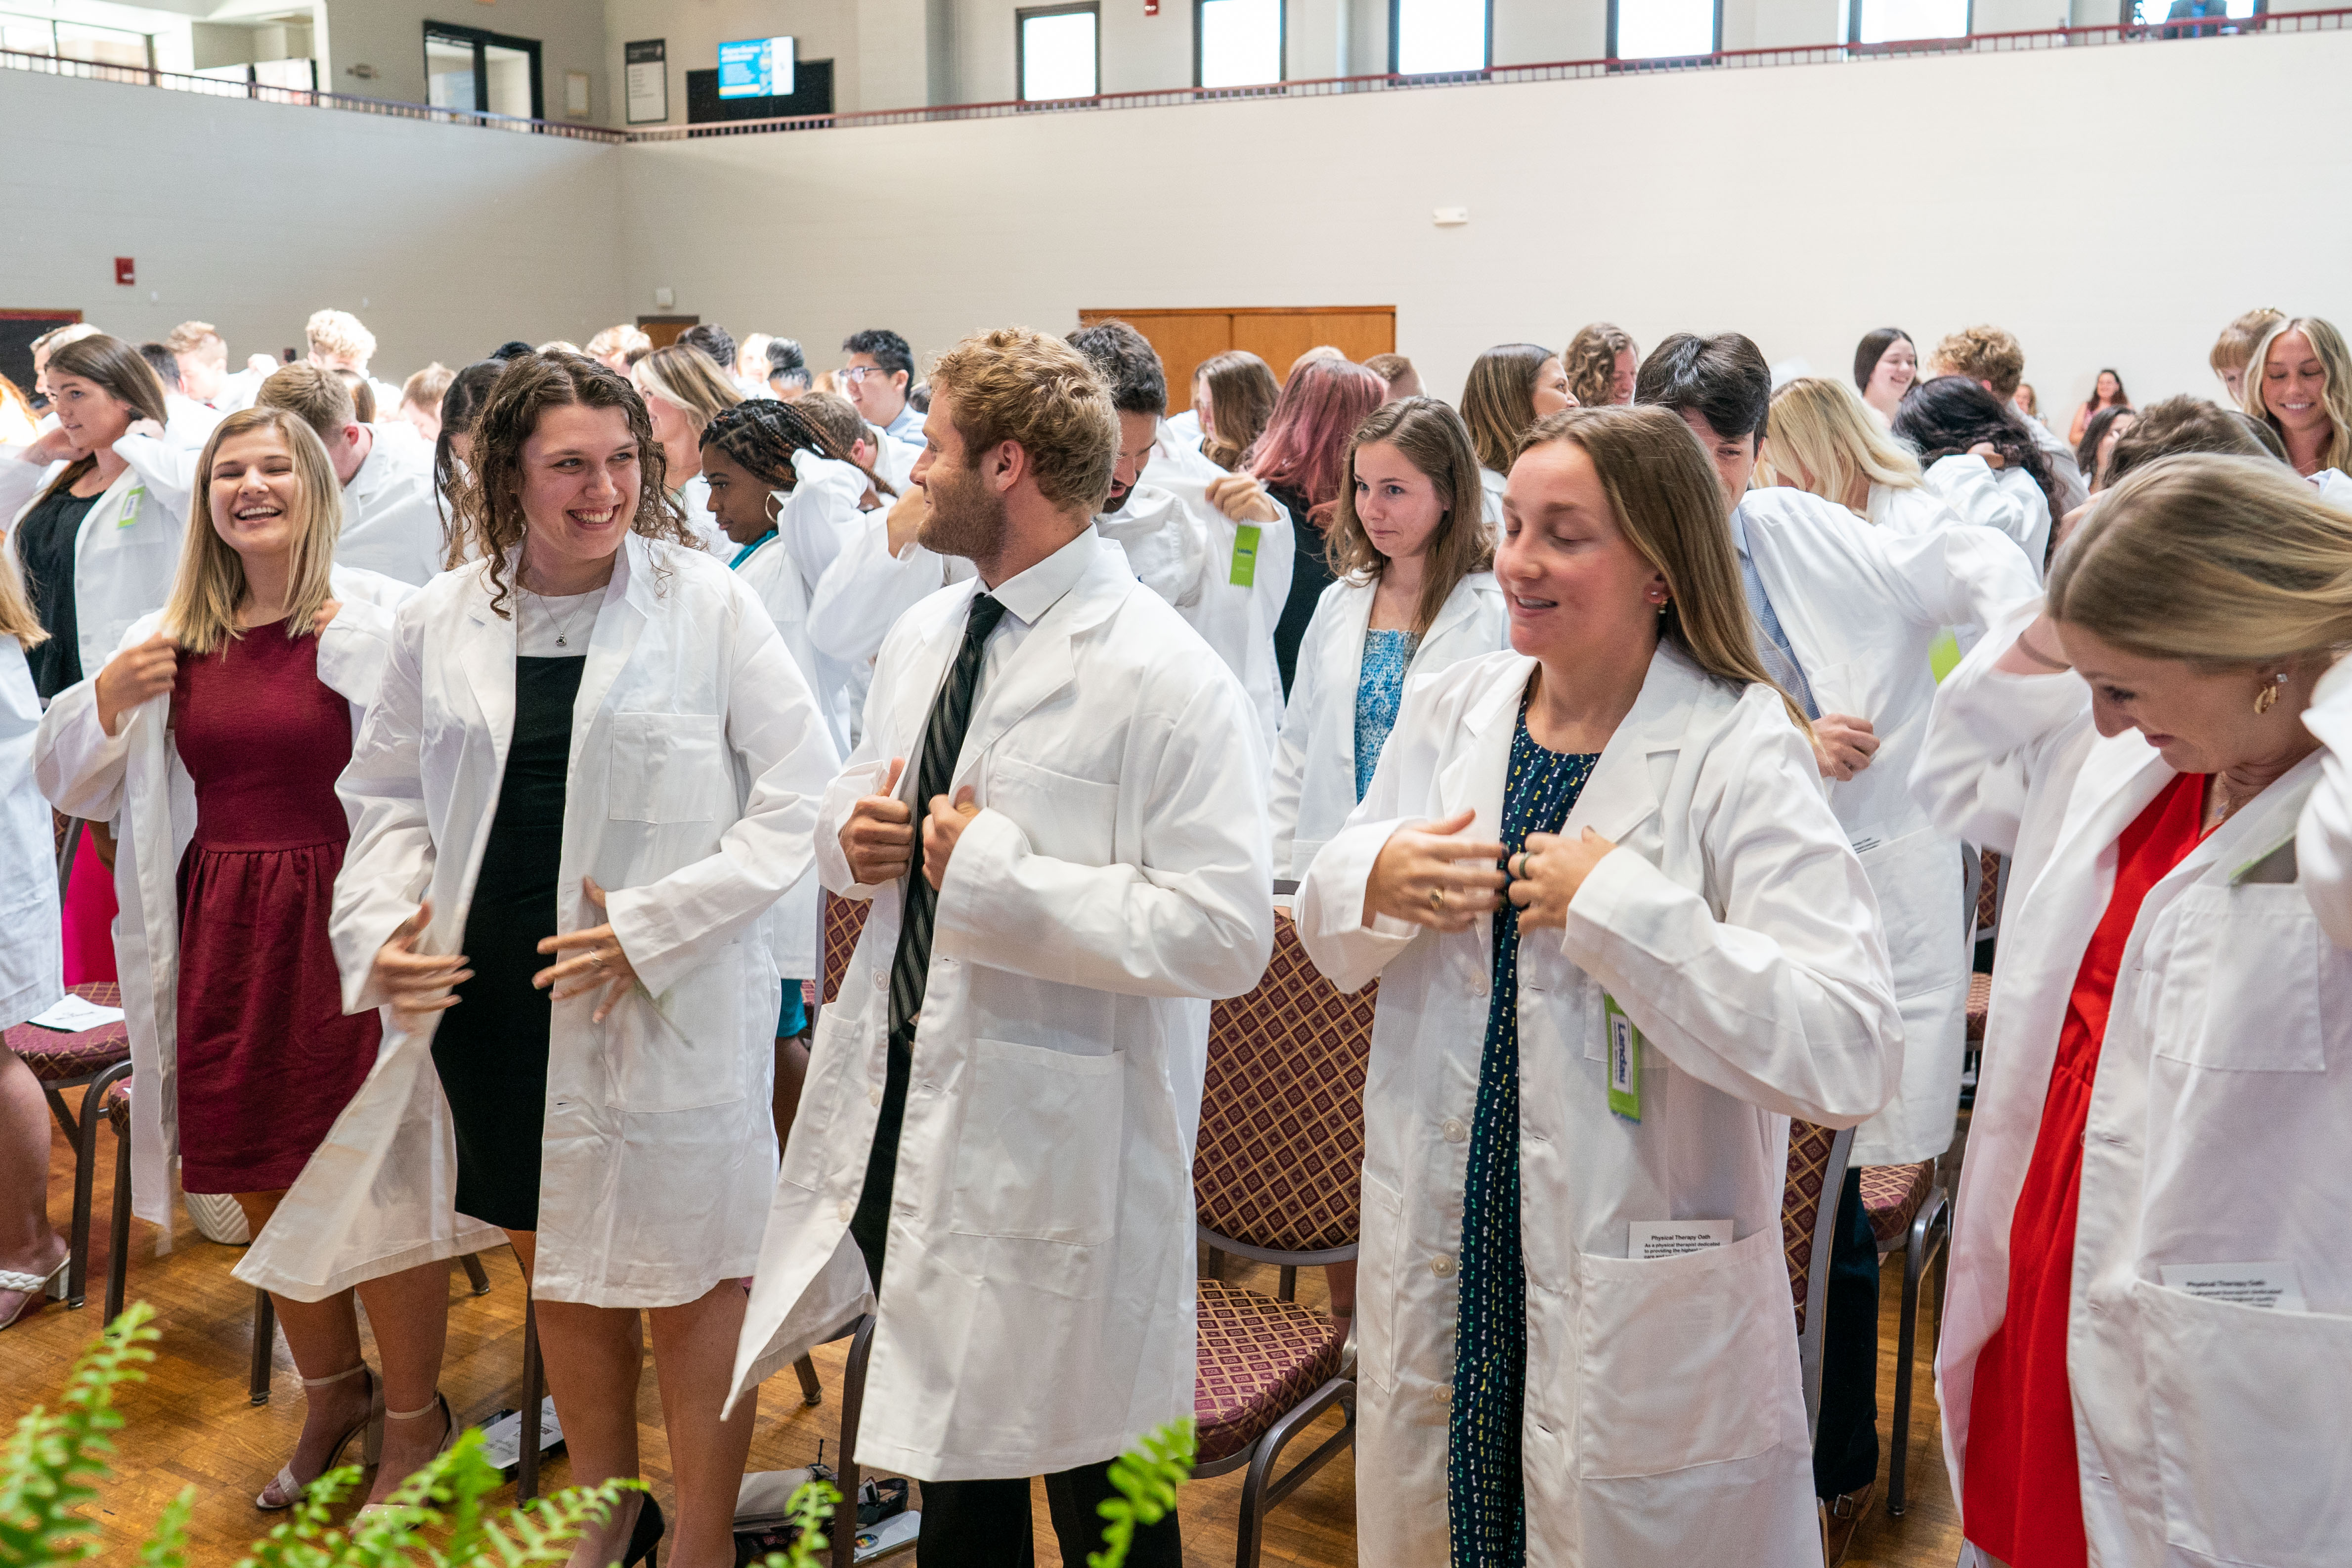 DPT Students wearing white coats